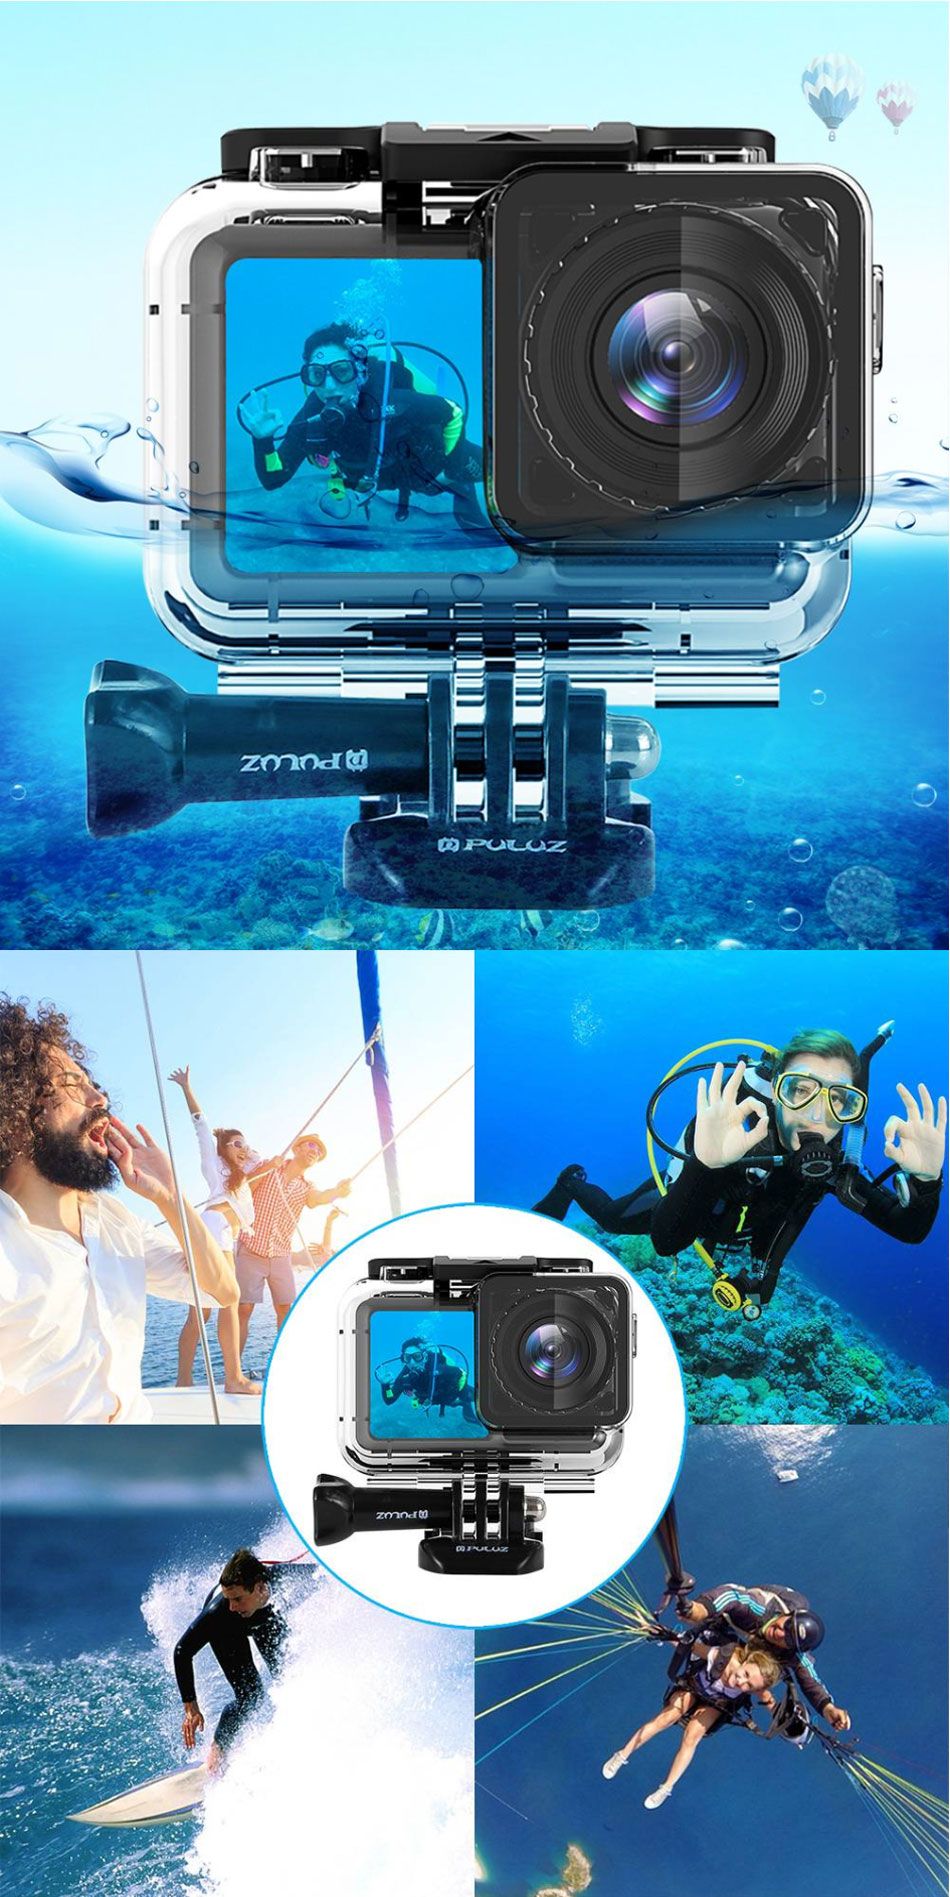 PULUZ-PU398-61M-Underwater-Waterproof-Diving-Swimming-Protective-Case-Shell-for-DJI-OSMO-Action-Spor-1537305